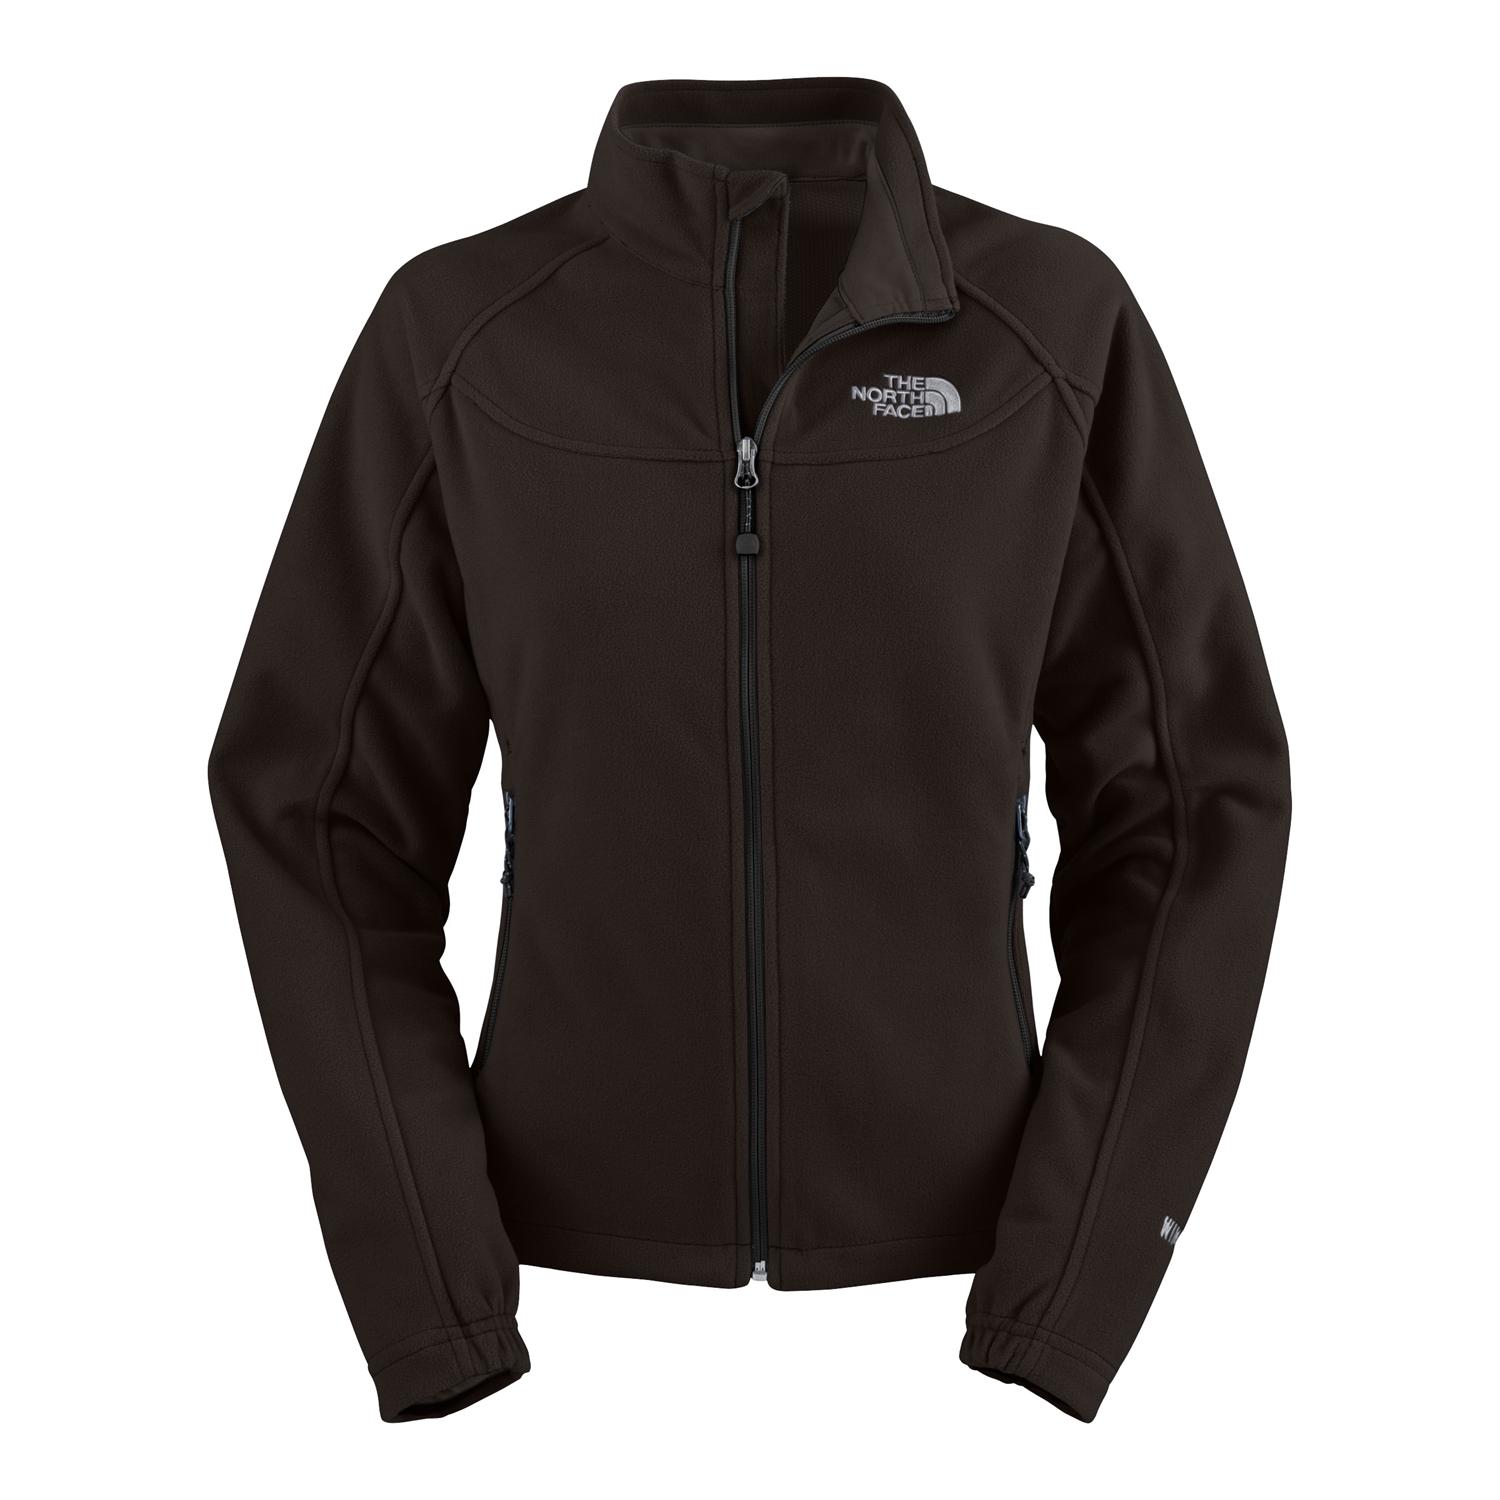 The North Face Windwall 1 Jacket - Women's | evo outlet